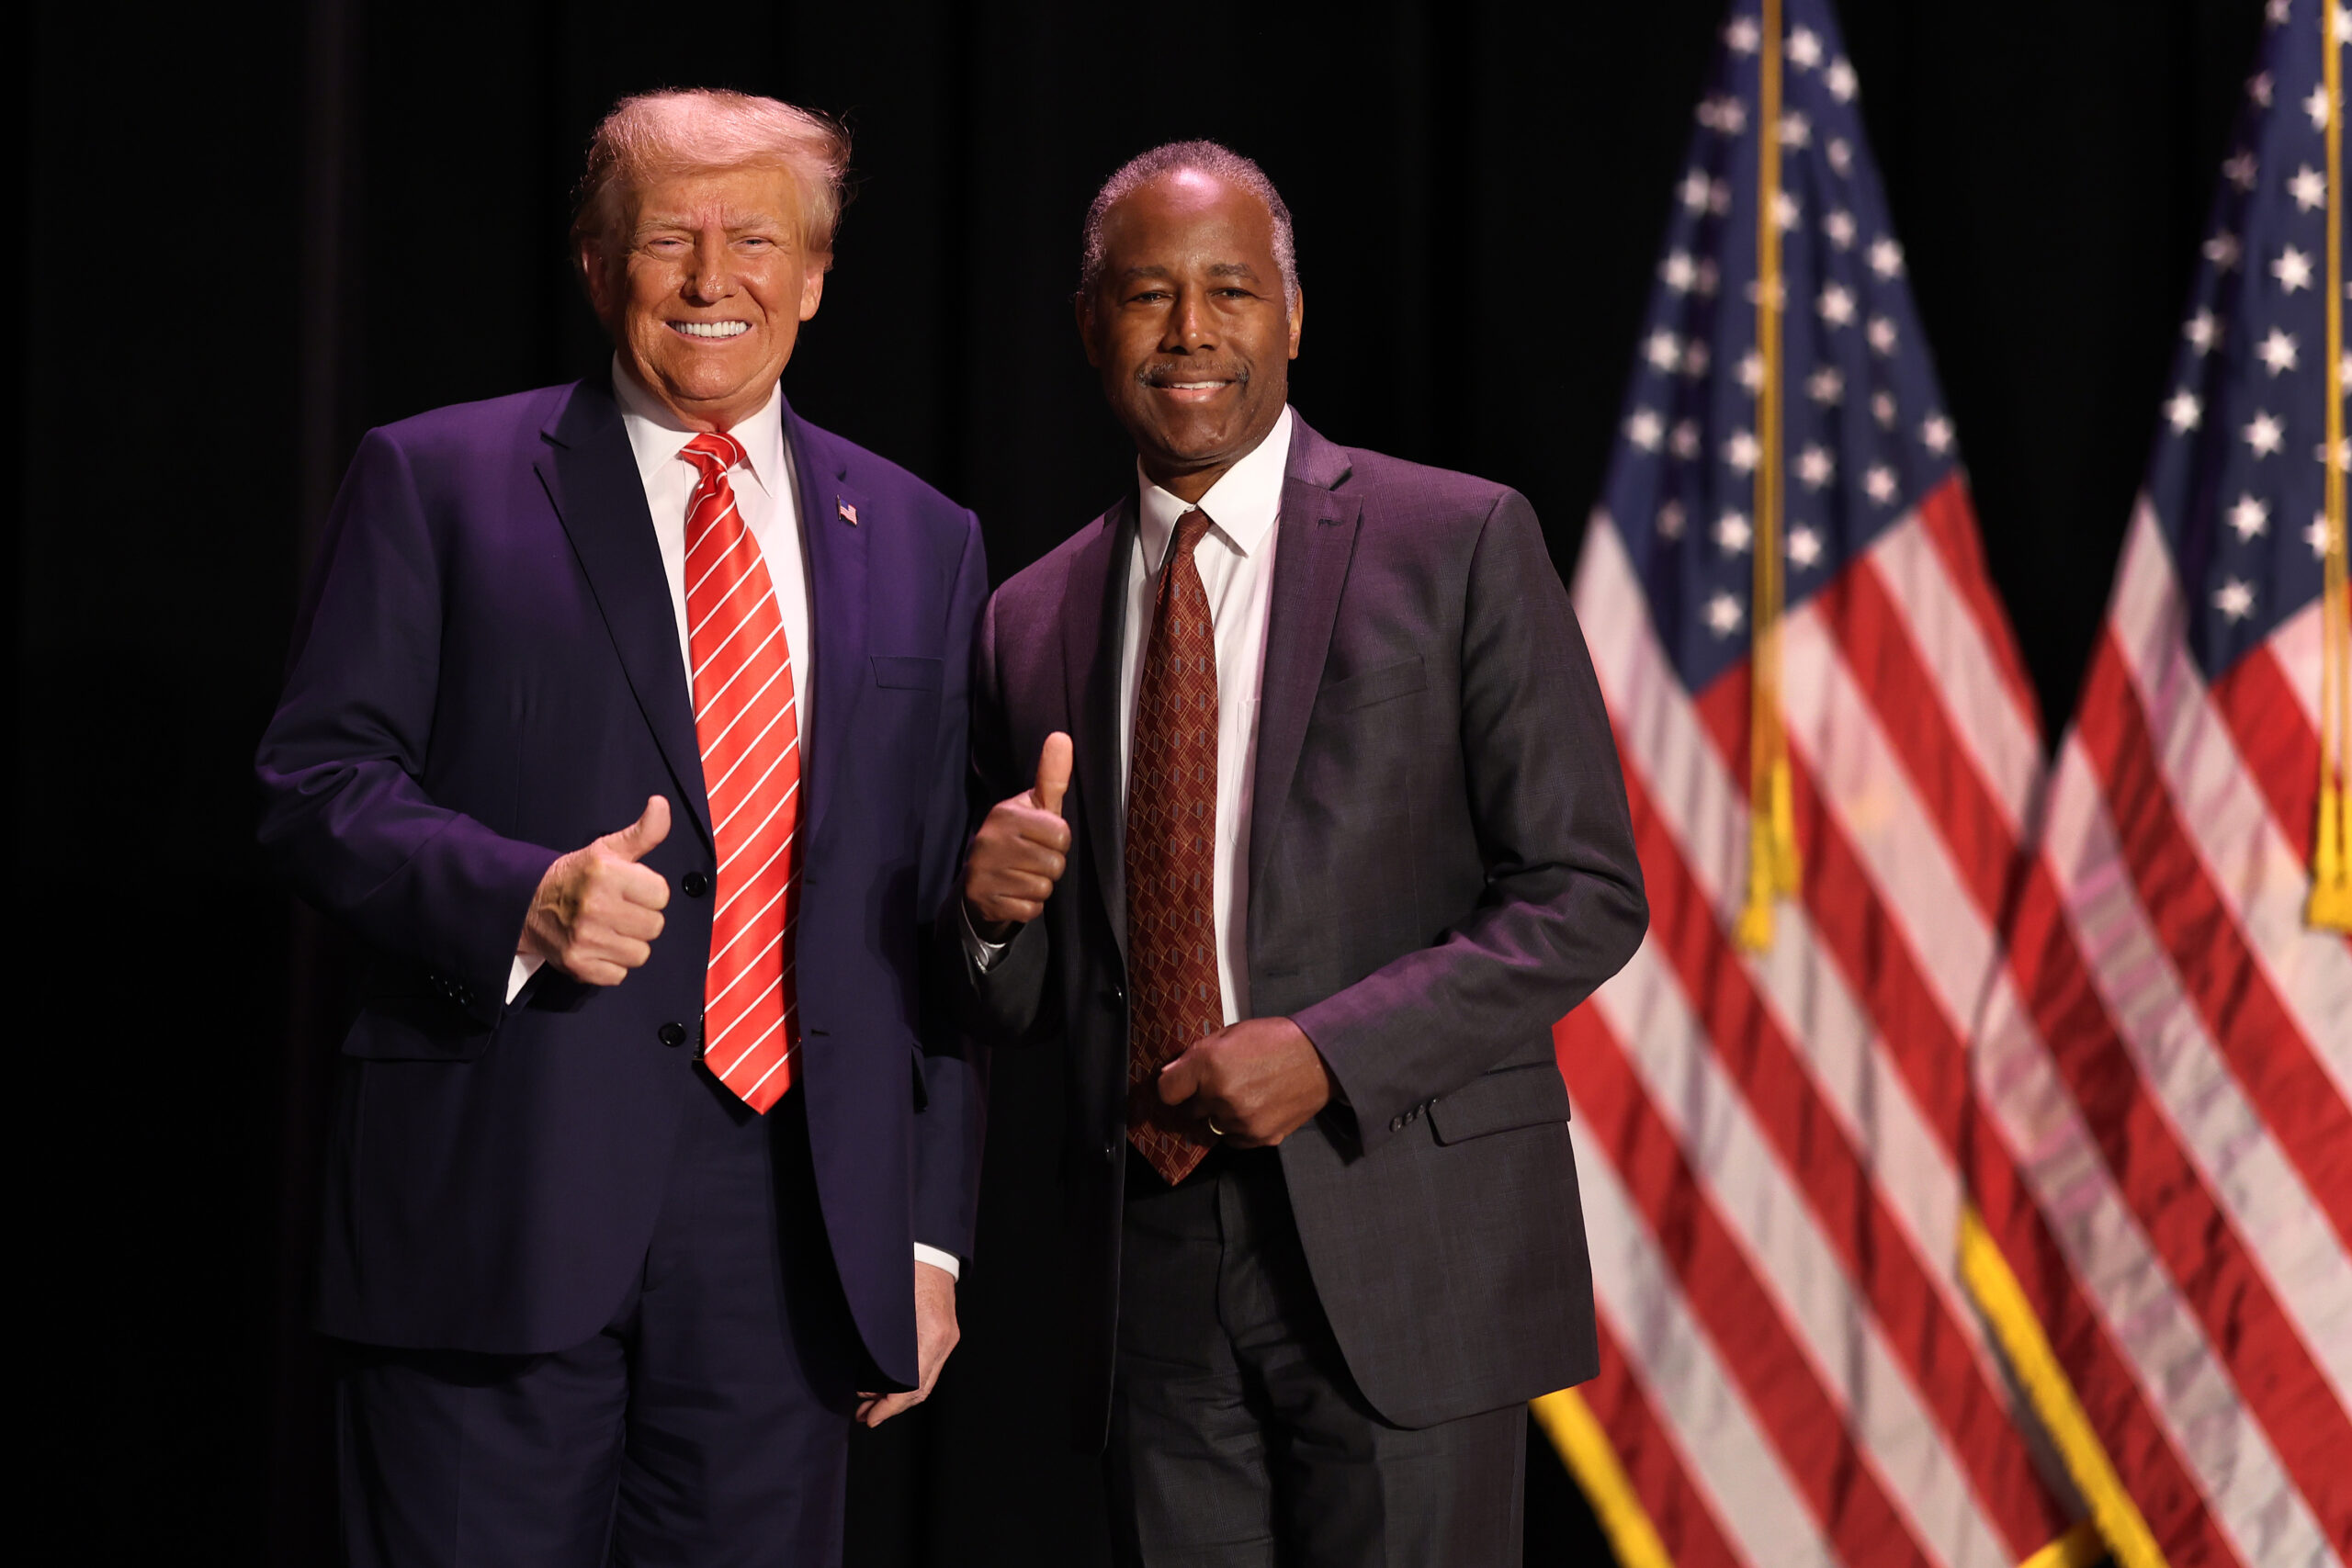 Ben Carson Endorses Trump For President: ‘Biggest Threat To The Administrative State’